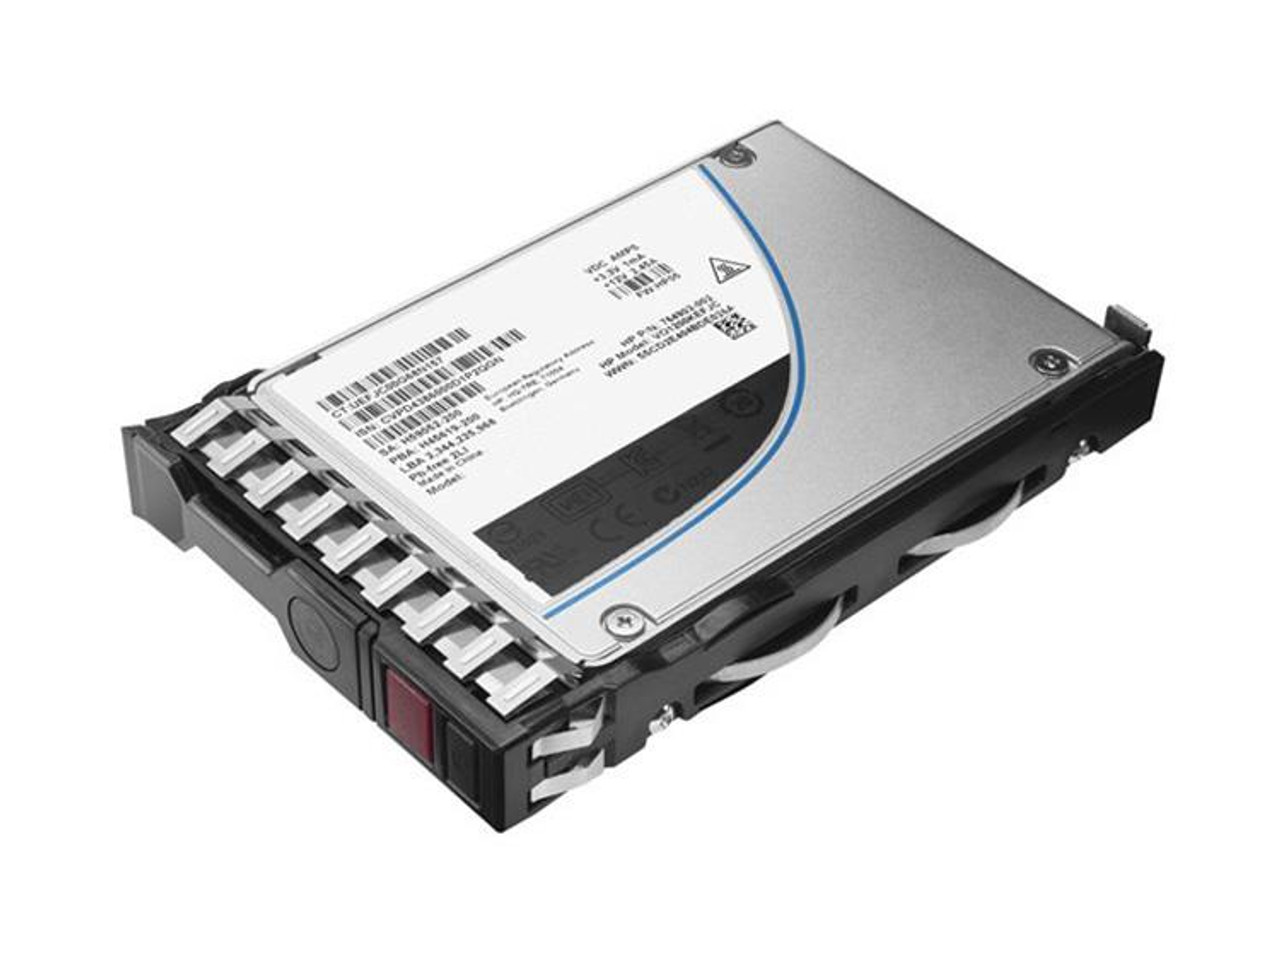 P04482-B21 HPE 7.68TB TLC SATA 6Gbps Hot Swap Read Intensive 2.5-inch Internal Solid State Drive (SSD) with Smart Carrier